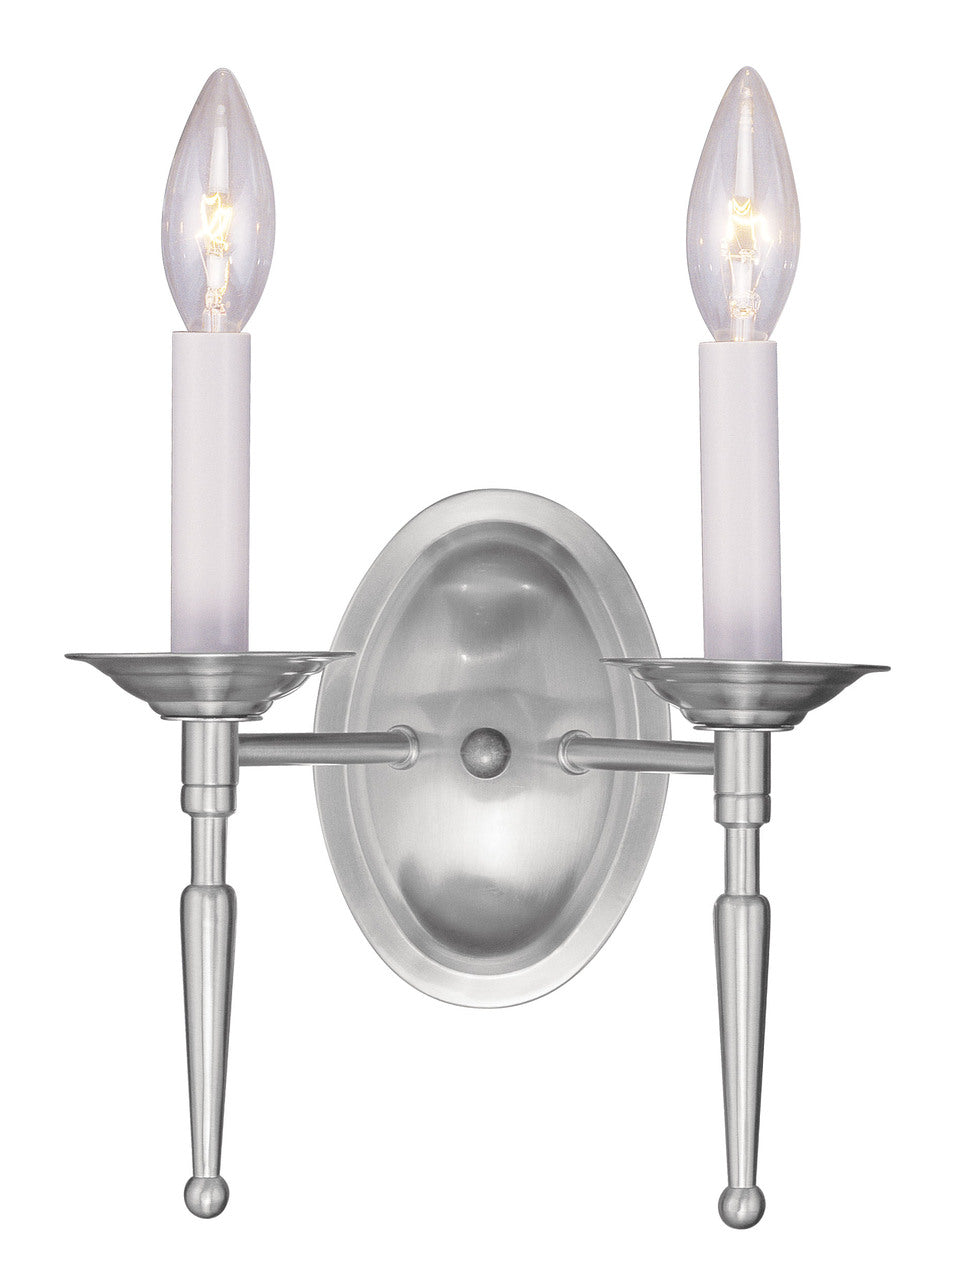 LIVEX Lighting 5122-91 Williamsburgh Wall Sconce in Brushed Nickel (2 Light)